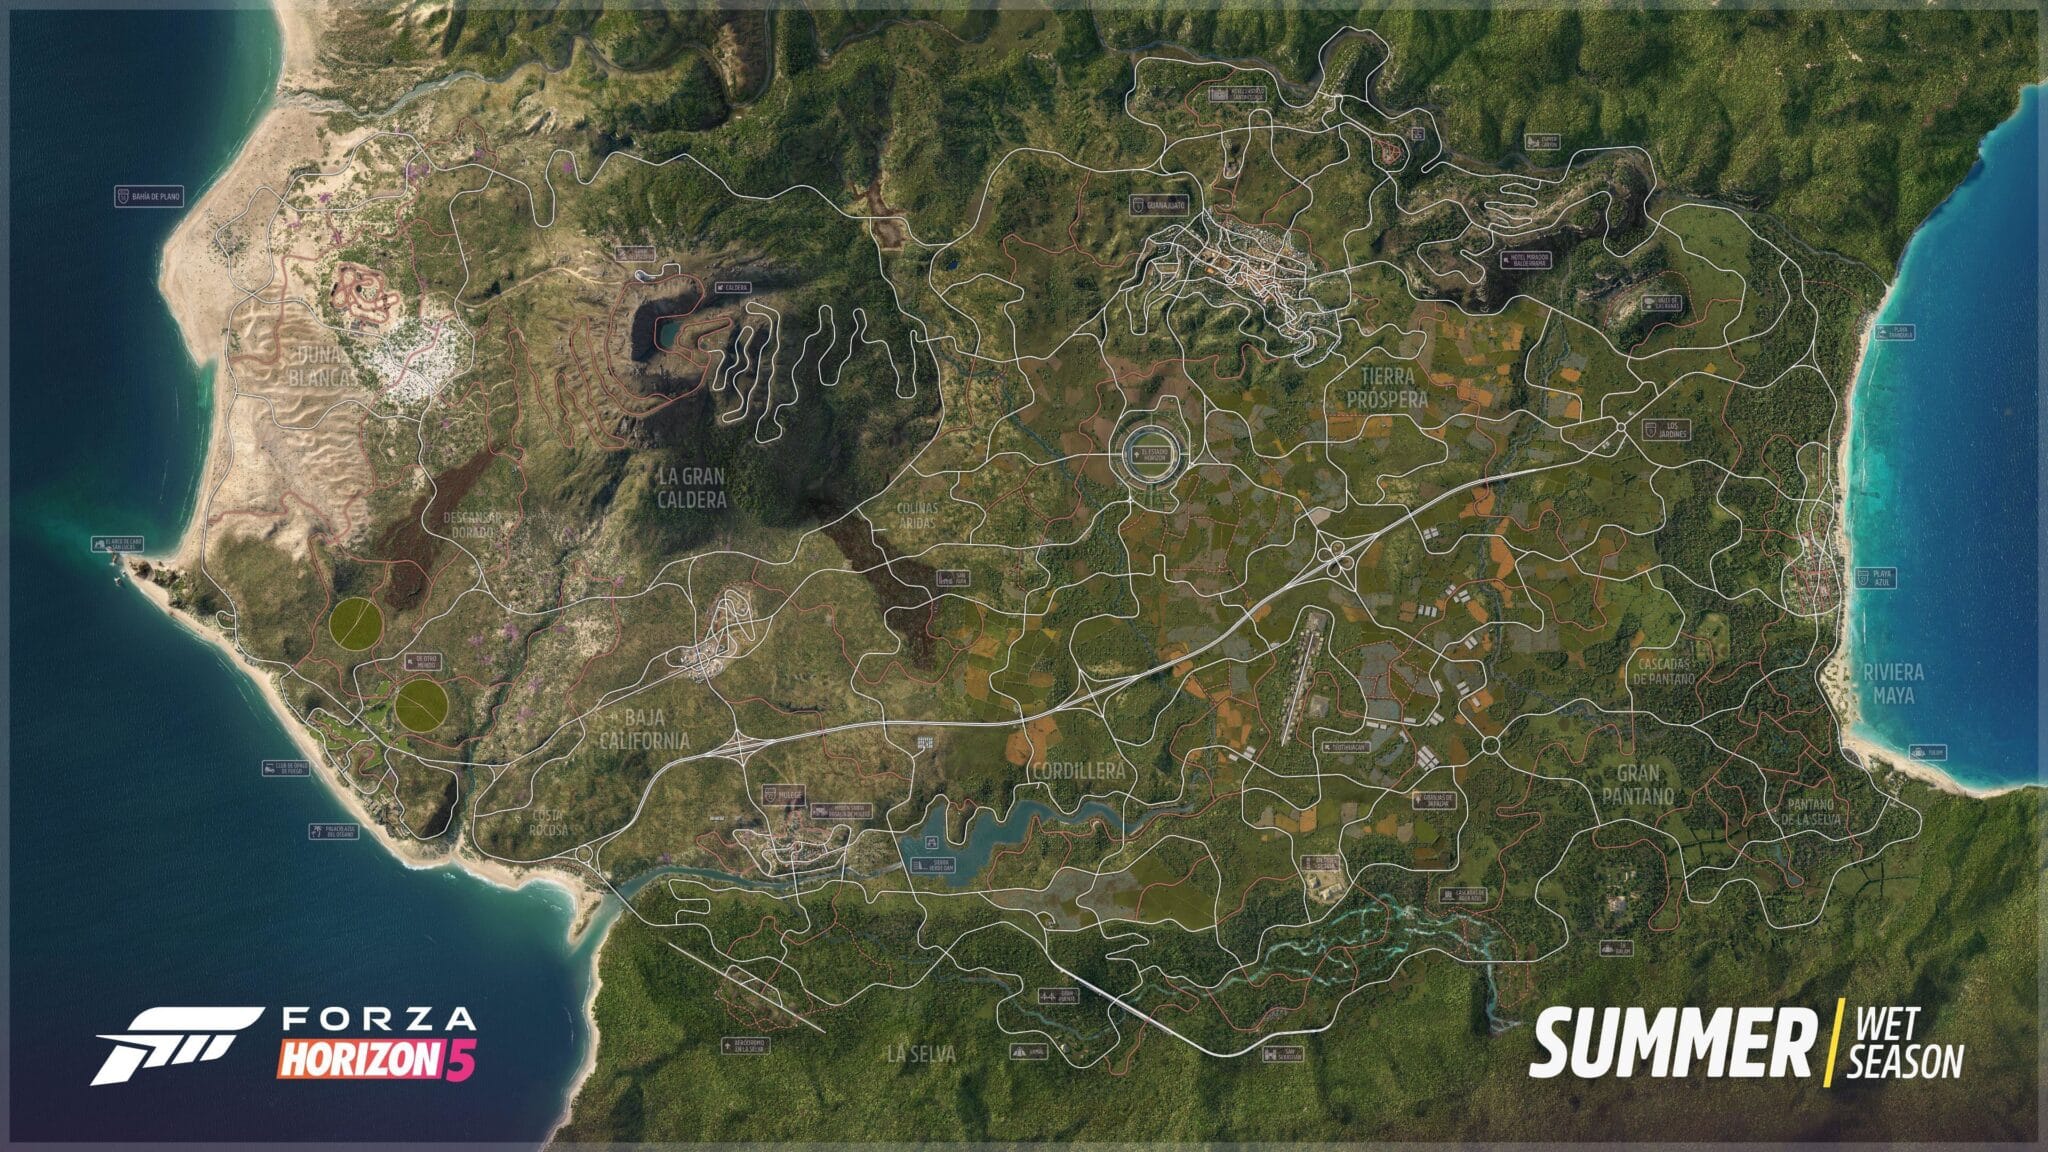 The complete summer map of Forza Horizon 5.